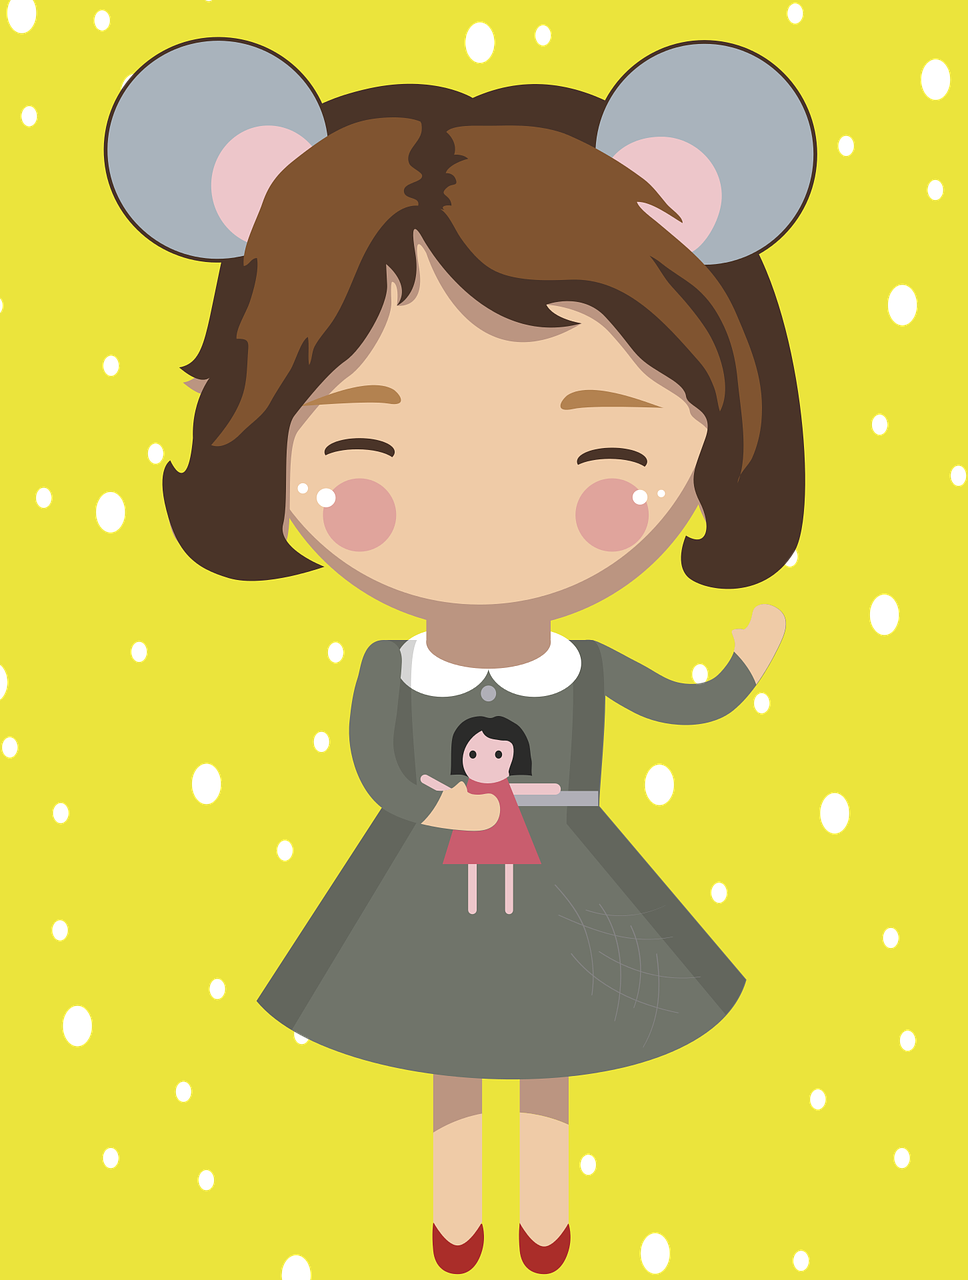 a little girl in a dress holding a doll, a picture, inspired by Takehisa Yumeji, cute mouse pokemon, simple cartoon style, mrs bean, with yellow cloths